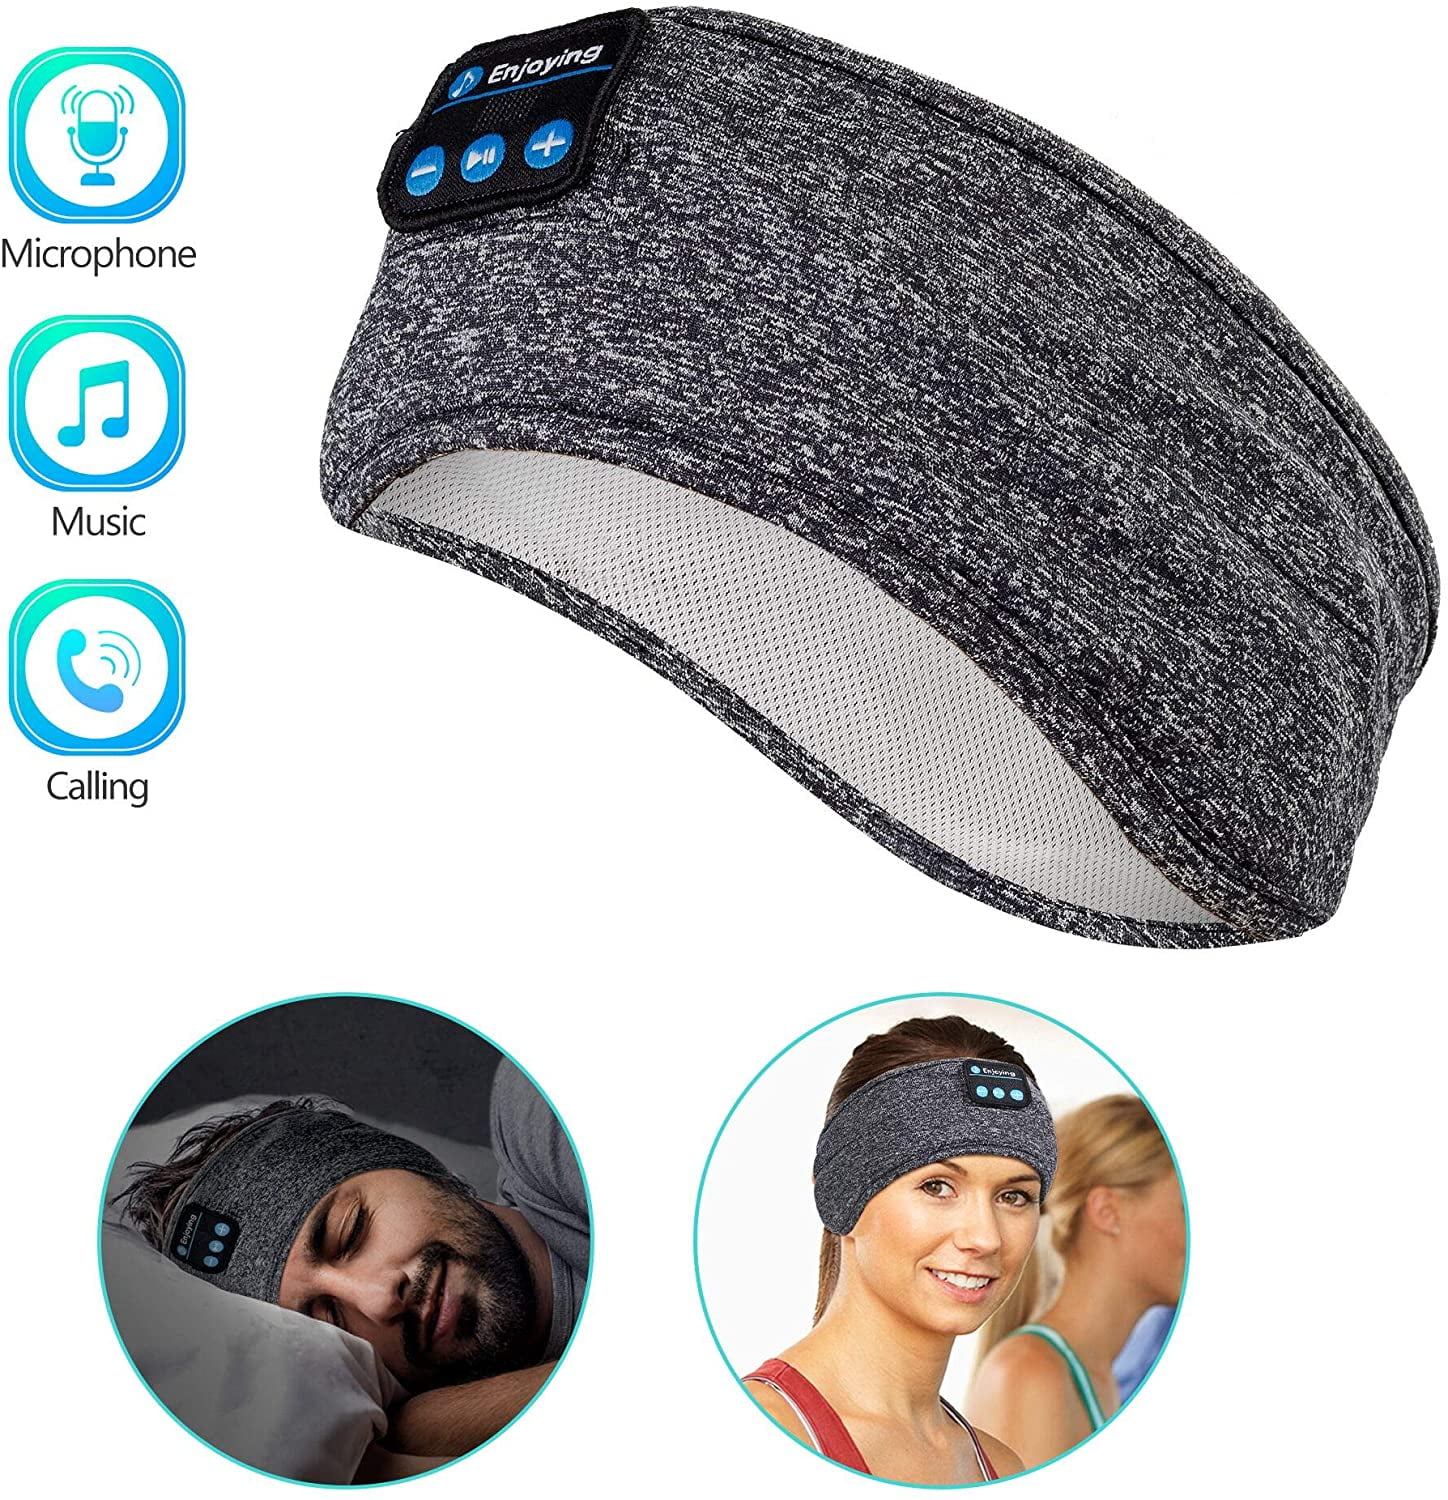 Washable Sleeping Headphones Wireless Headband with Built-in HD Stereo Speakers Perfect for Sports,Workout Running Yoga,Insomnia Sleep Headphones Bluetooth